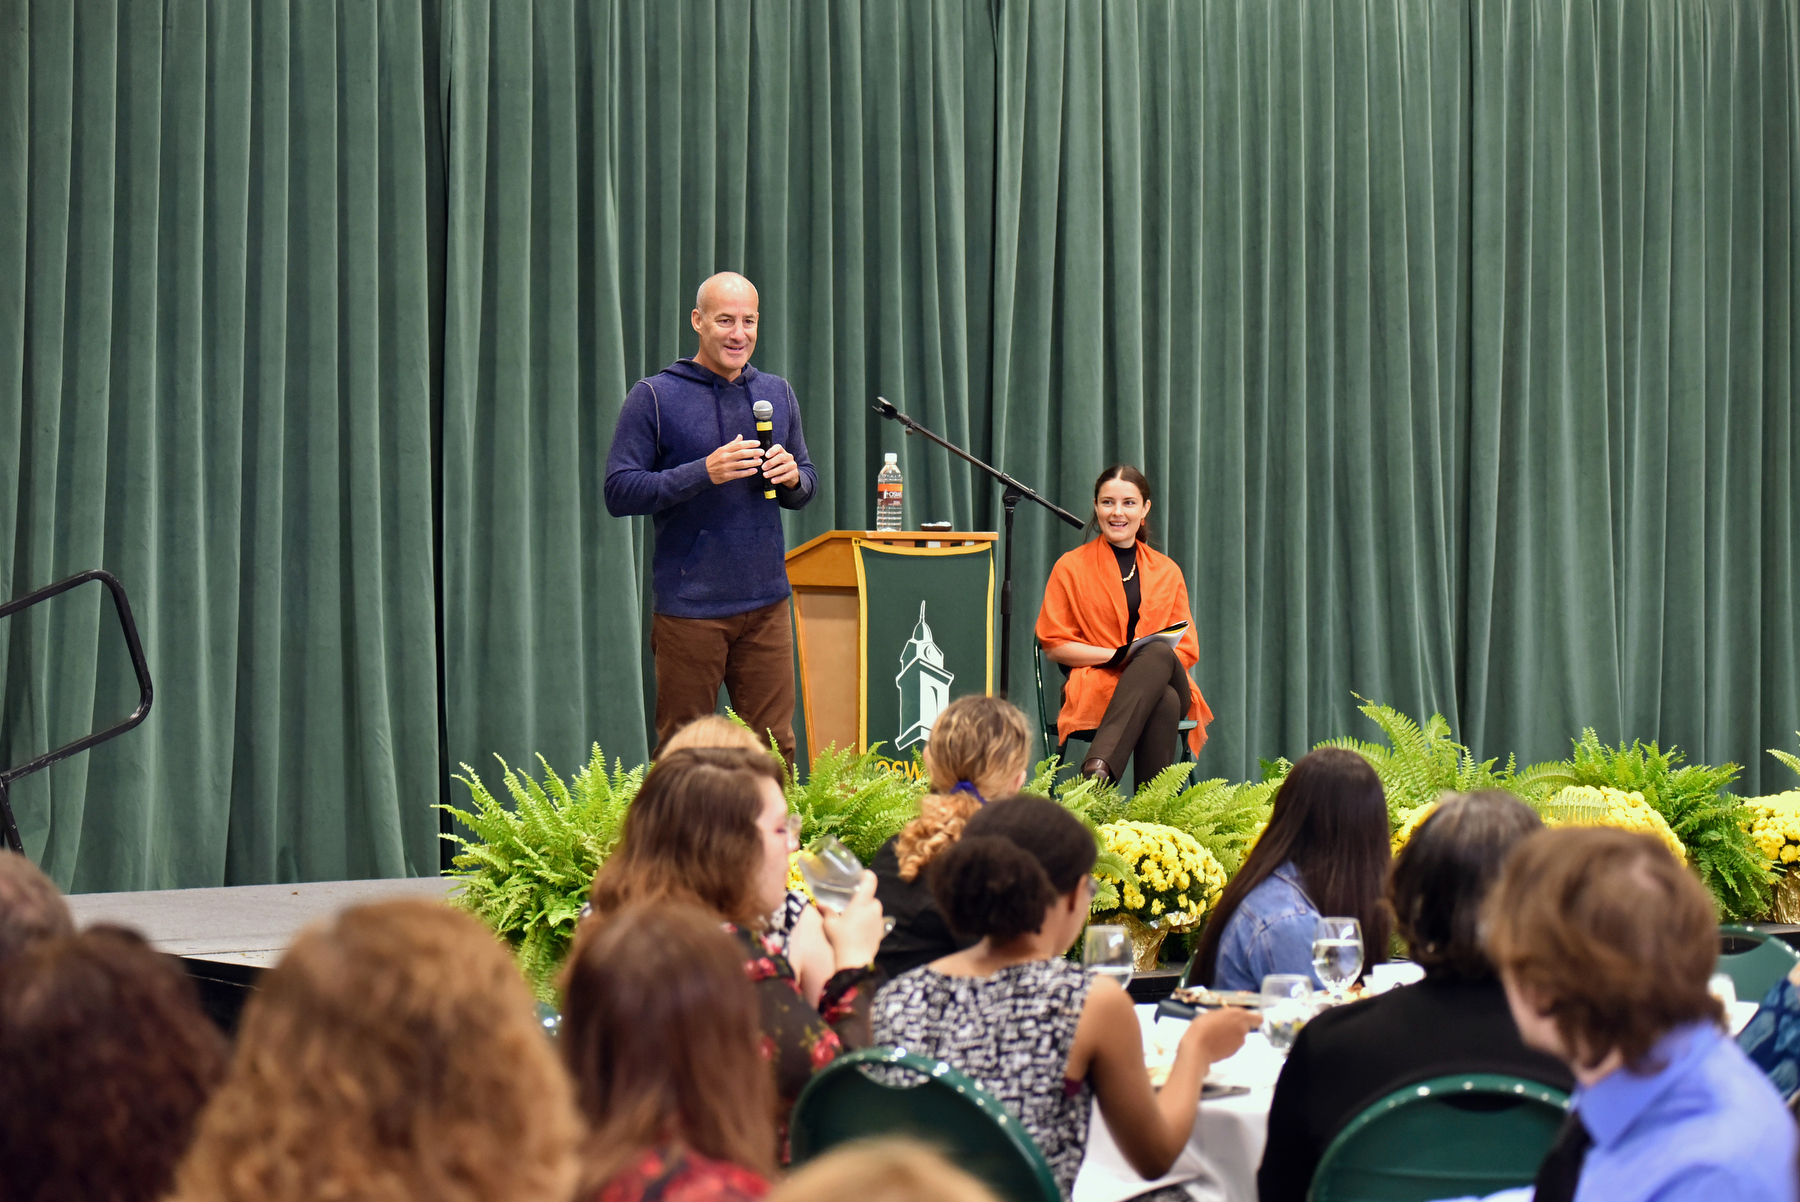 The 2023 Scholars Brunch brought together nearly 300 scholarship recipients, benefactors and university community members to share appreciation for each other and SUNY Oswego. Speakers at the Sept 30 annual event in Marano Campus Center – among them James Triandiflou, '88 along with Dianora De Marco '14 M'15 (pictured on stage) – highlighted the significant impact philanthropy makes on students, donors and the SUNY Oswego campus.